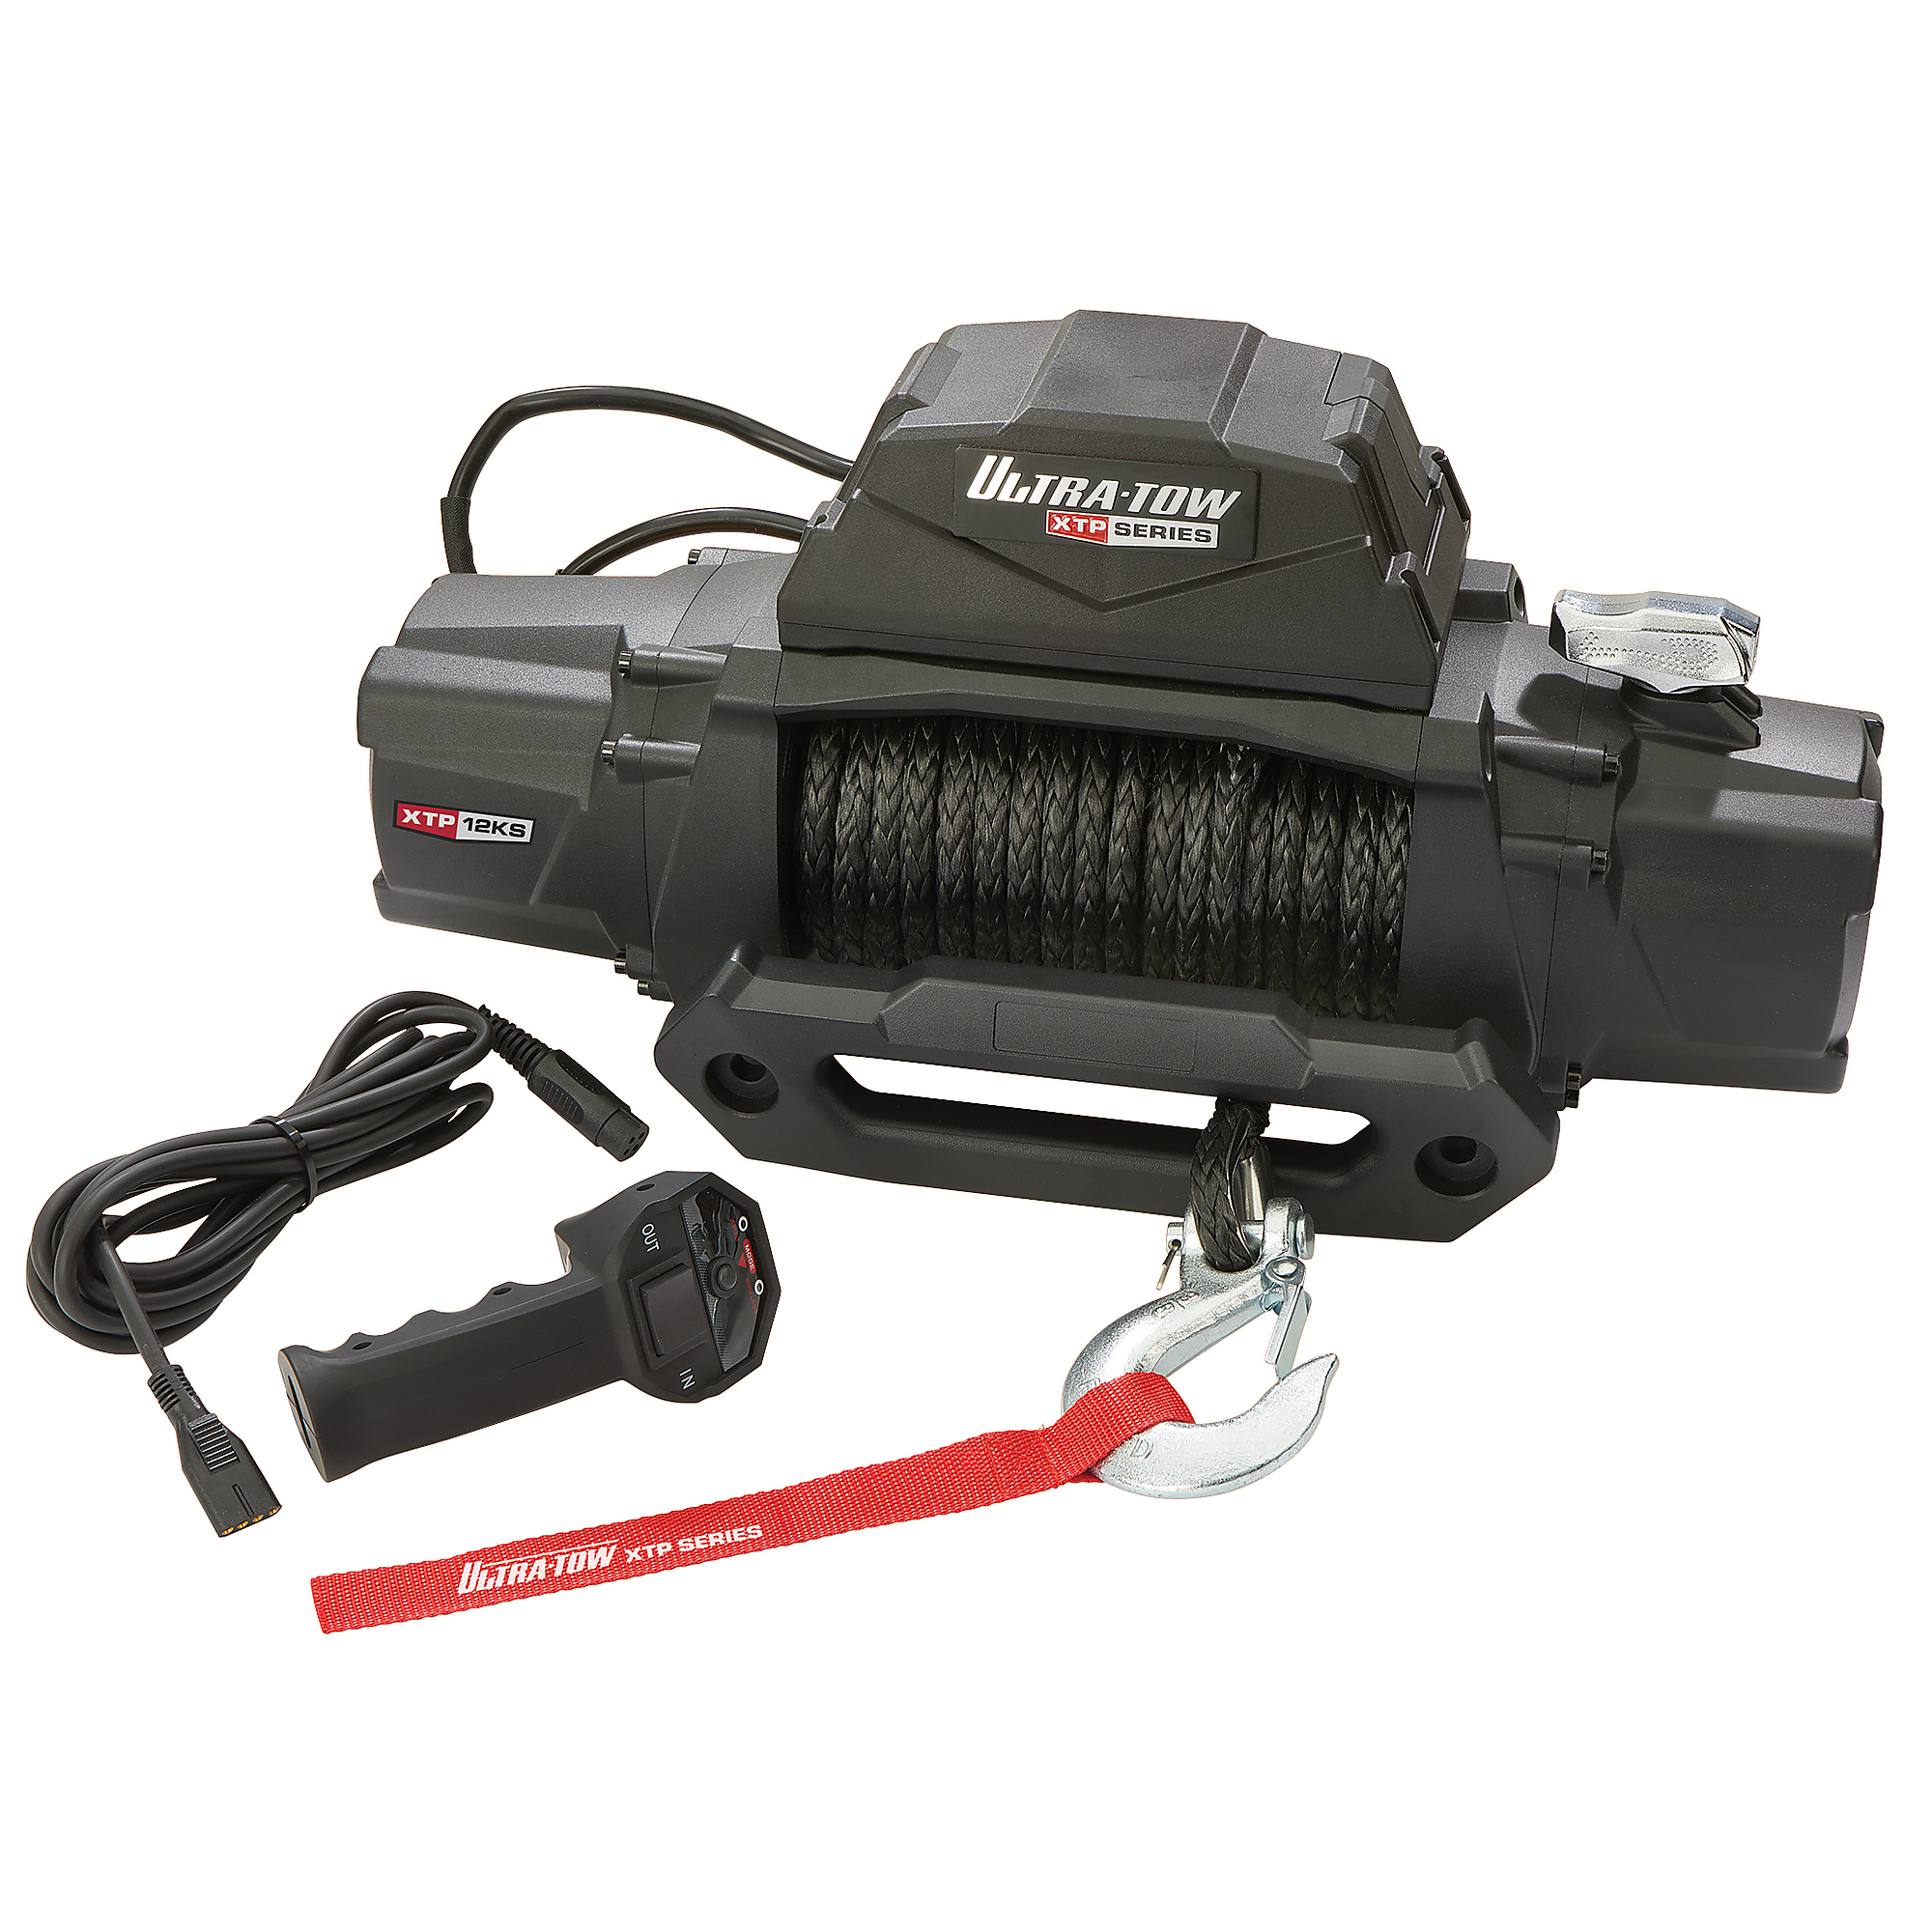 Ultra-Tow XTP 12 Volt Off-Road Vehicle Winch with Synthetic Rope, 12,000-Lb. Capacity, 390 Max. Amps, Model LD-TT12000B